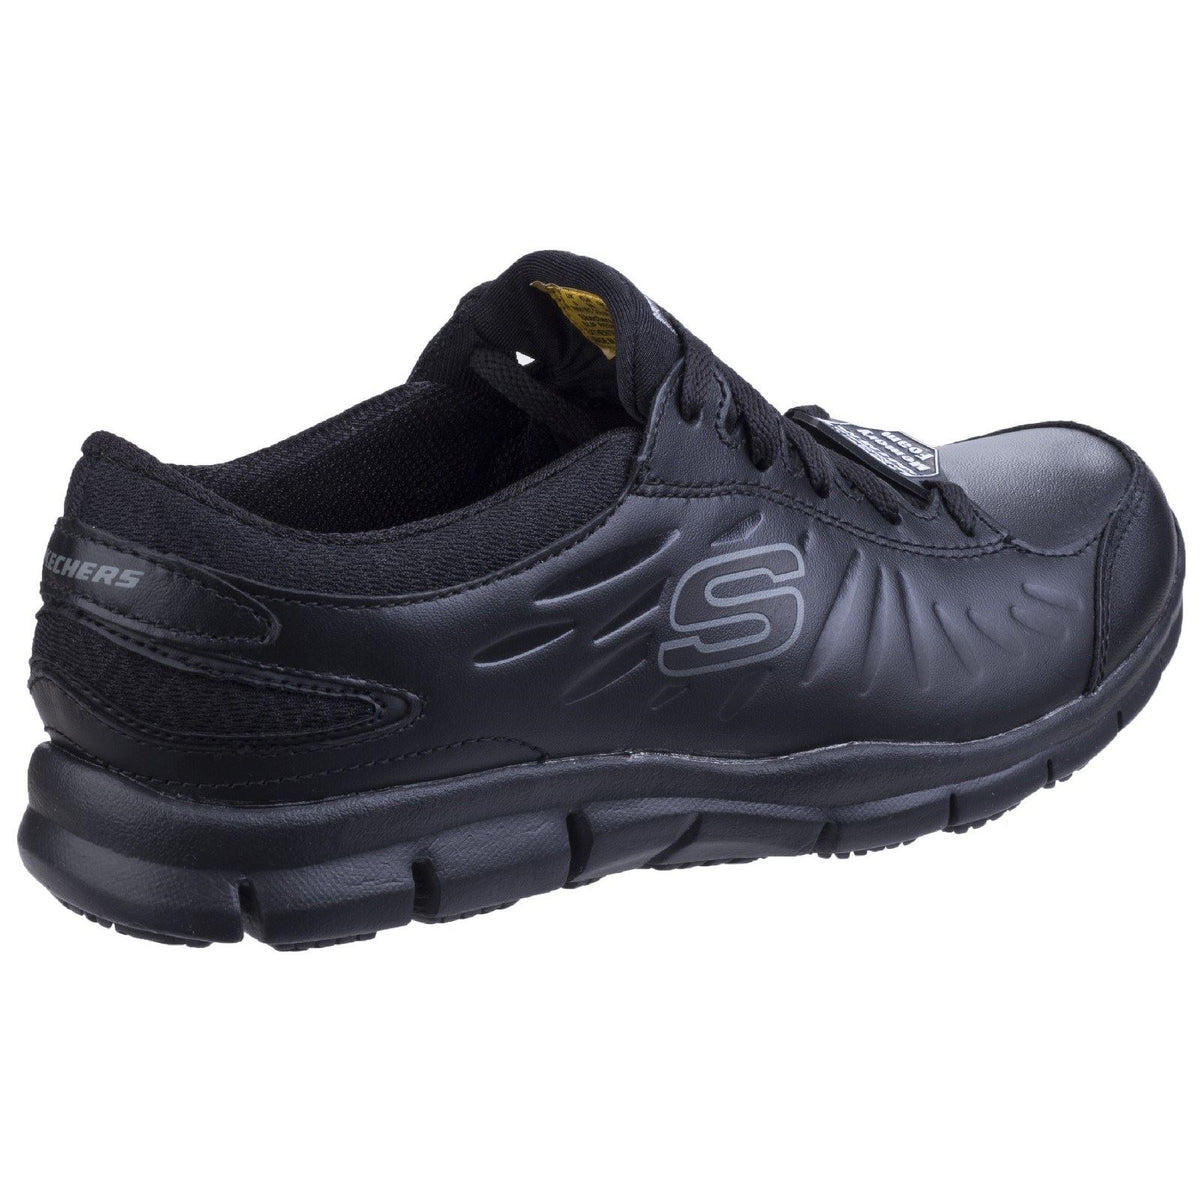 Skechers Eldred Occupational Shoes